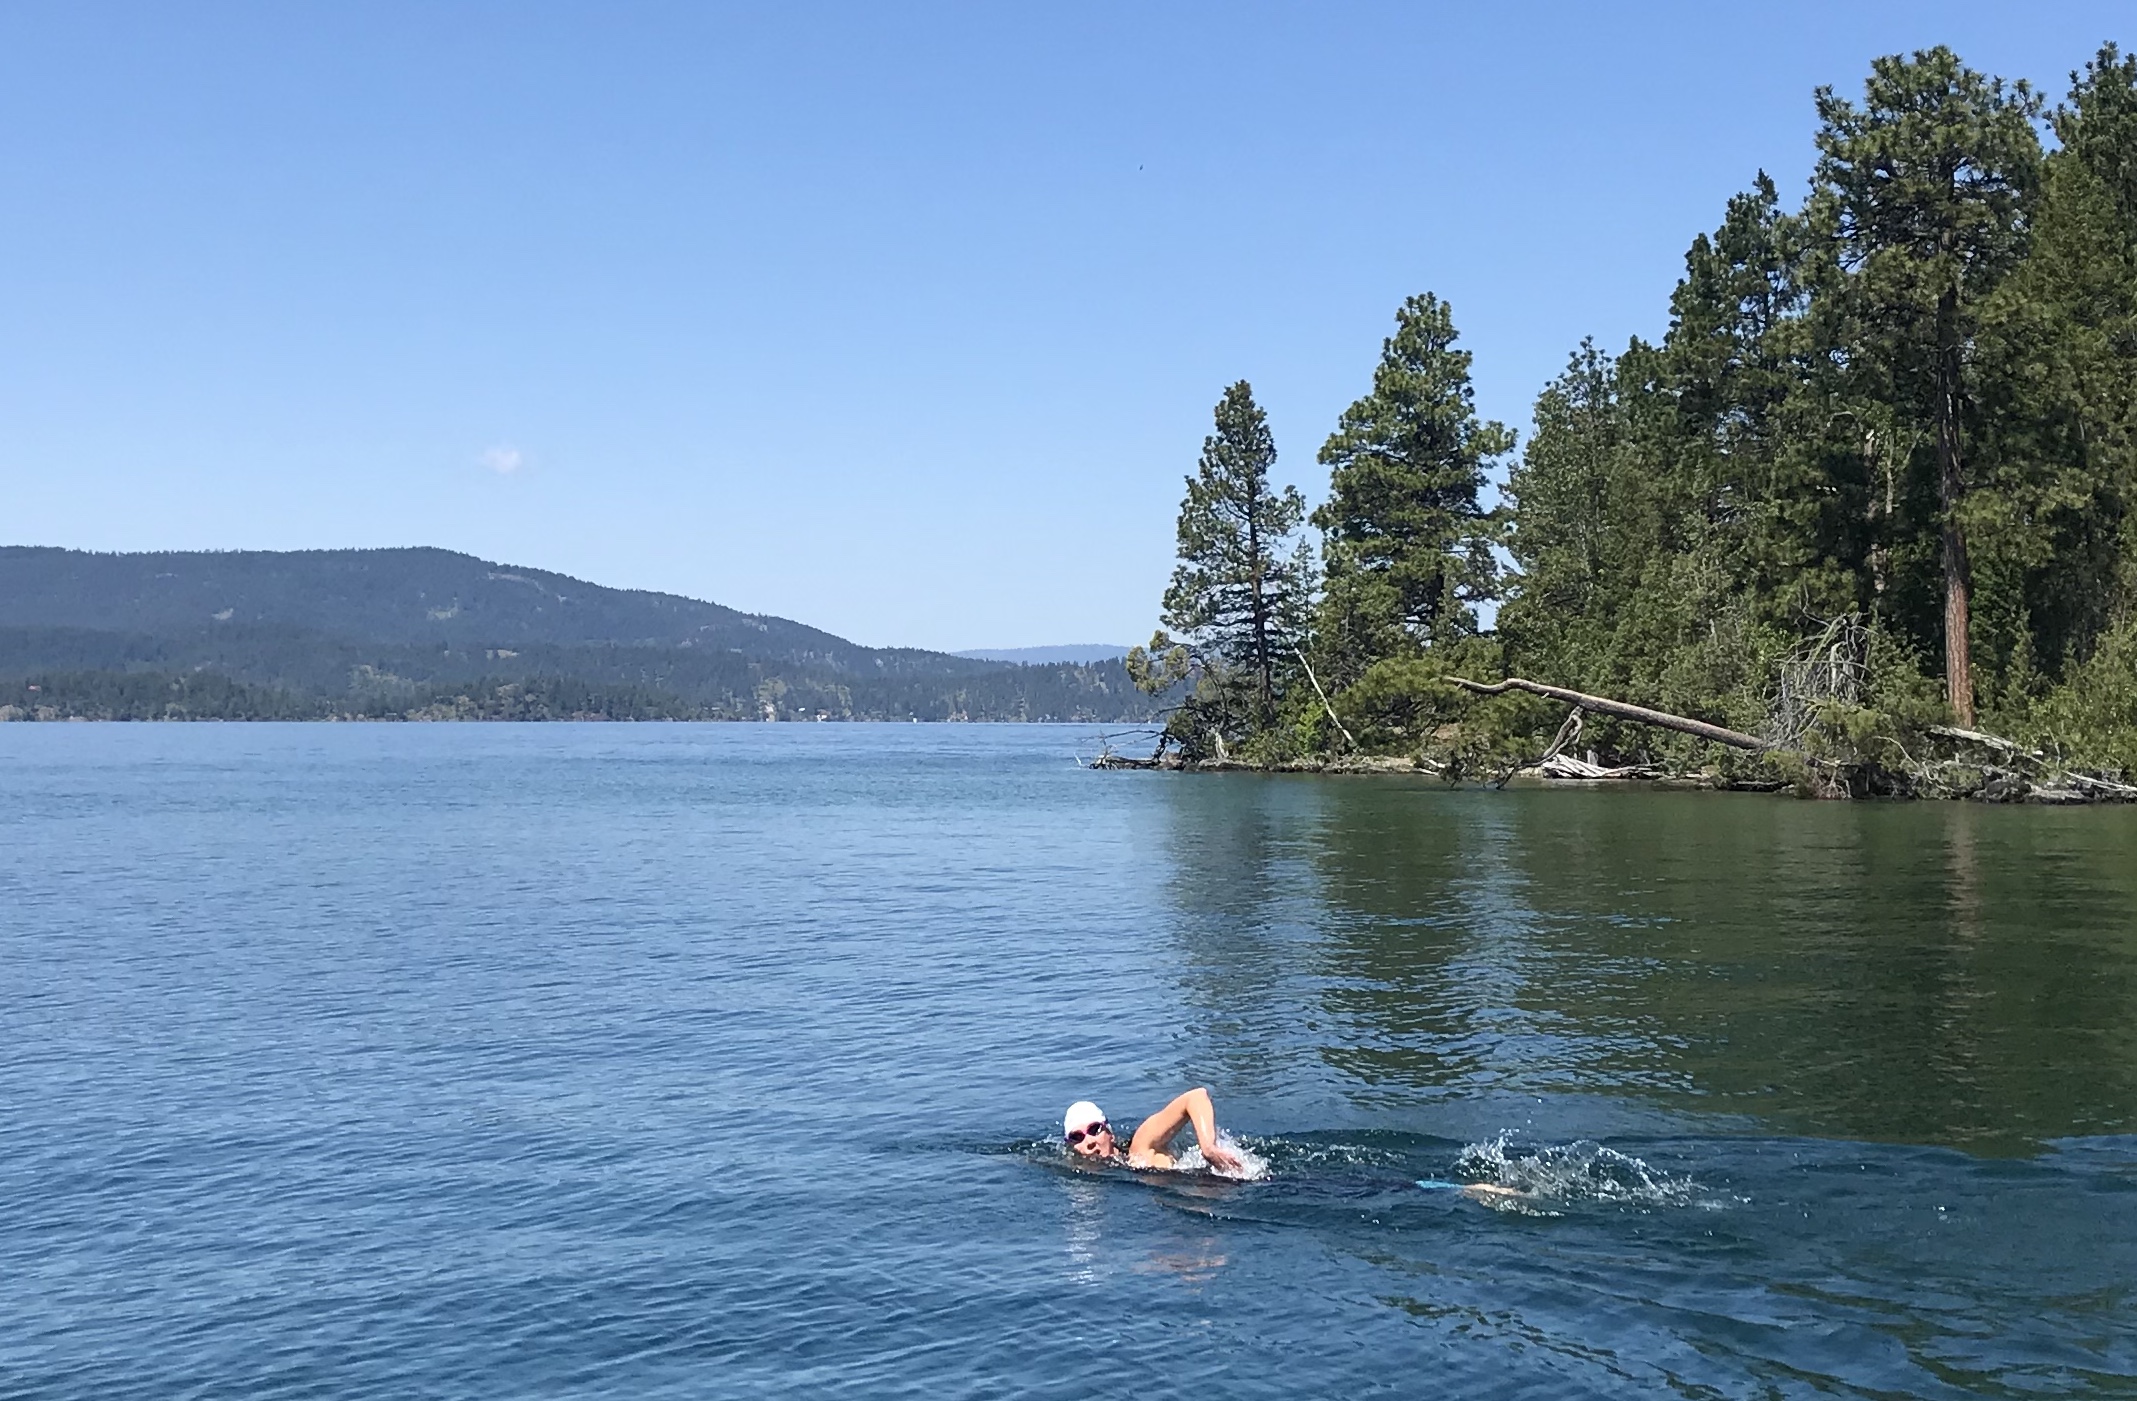 Woman swimming in Flathead lake. Trees on right side and mountains in the back.